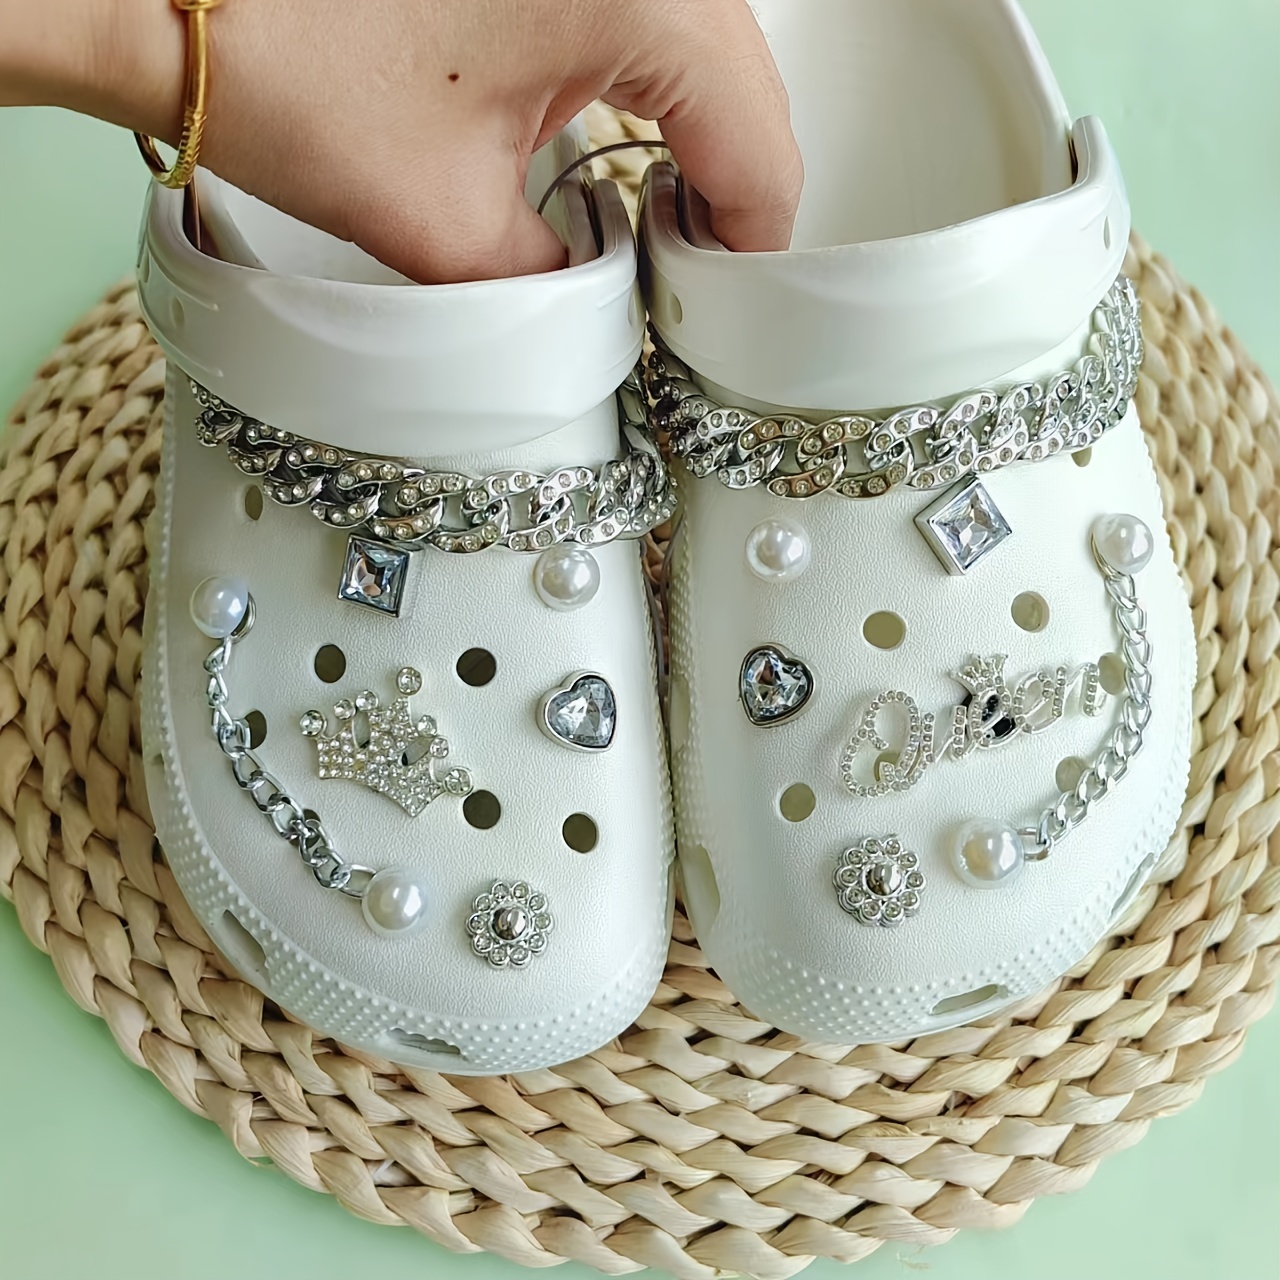 10pcs/set Bling Bear Shoe Charms for Clog Bubble Slides Sandals Shoes  Decoration DIY Accessories Fashion Rhinestone and Faux Pearl Croc Charms  with Chains for Christmas Birthday Gift Party